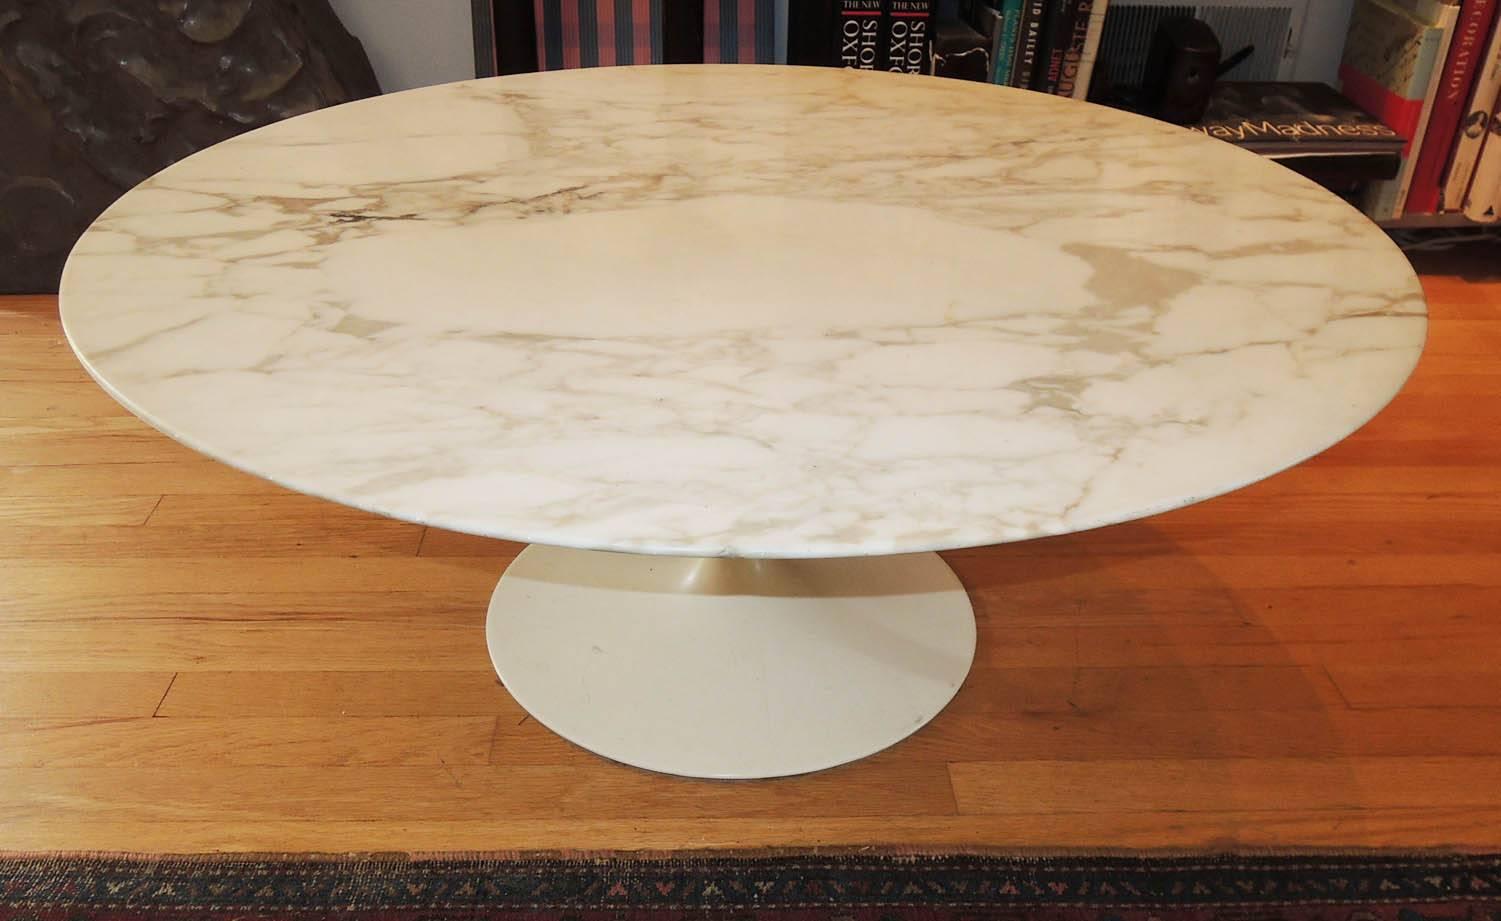 Eero Saarinen's Tulip cocktail table for Knoll.  Round Carrara marble top with reverse bevelled edge sits on top of a white enameled metal pedestal base. Original Knoll label.